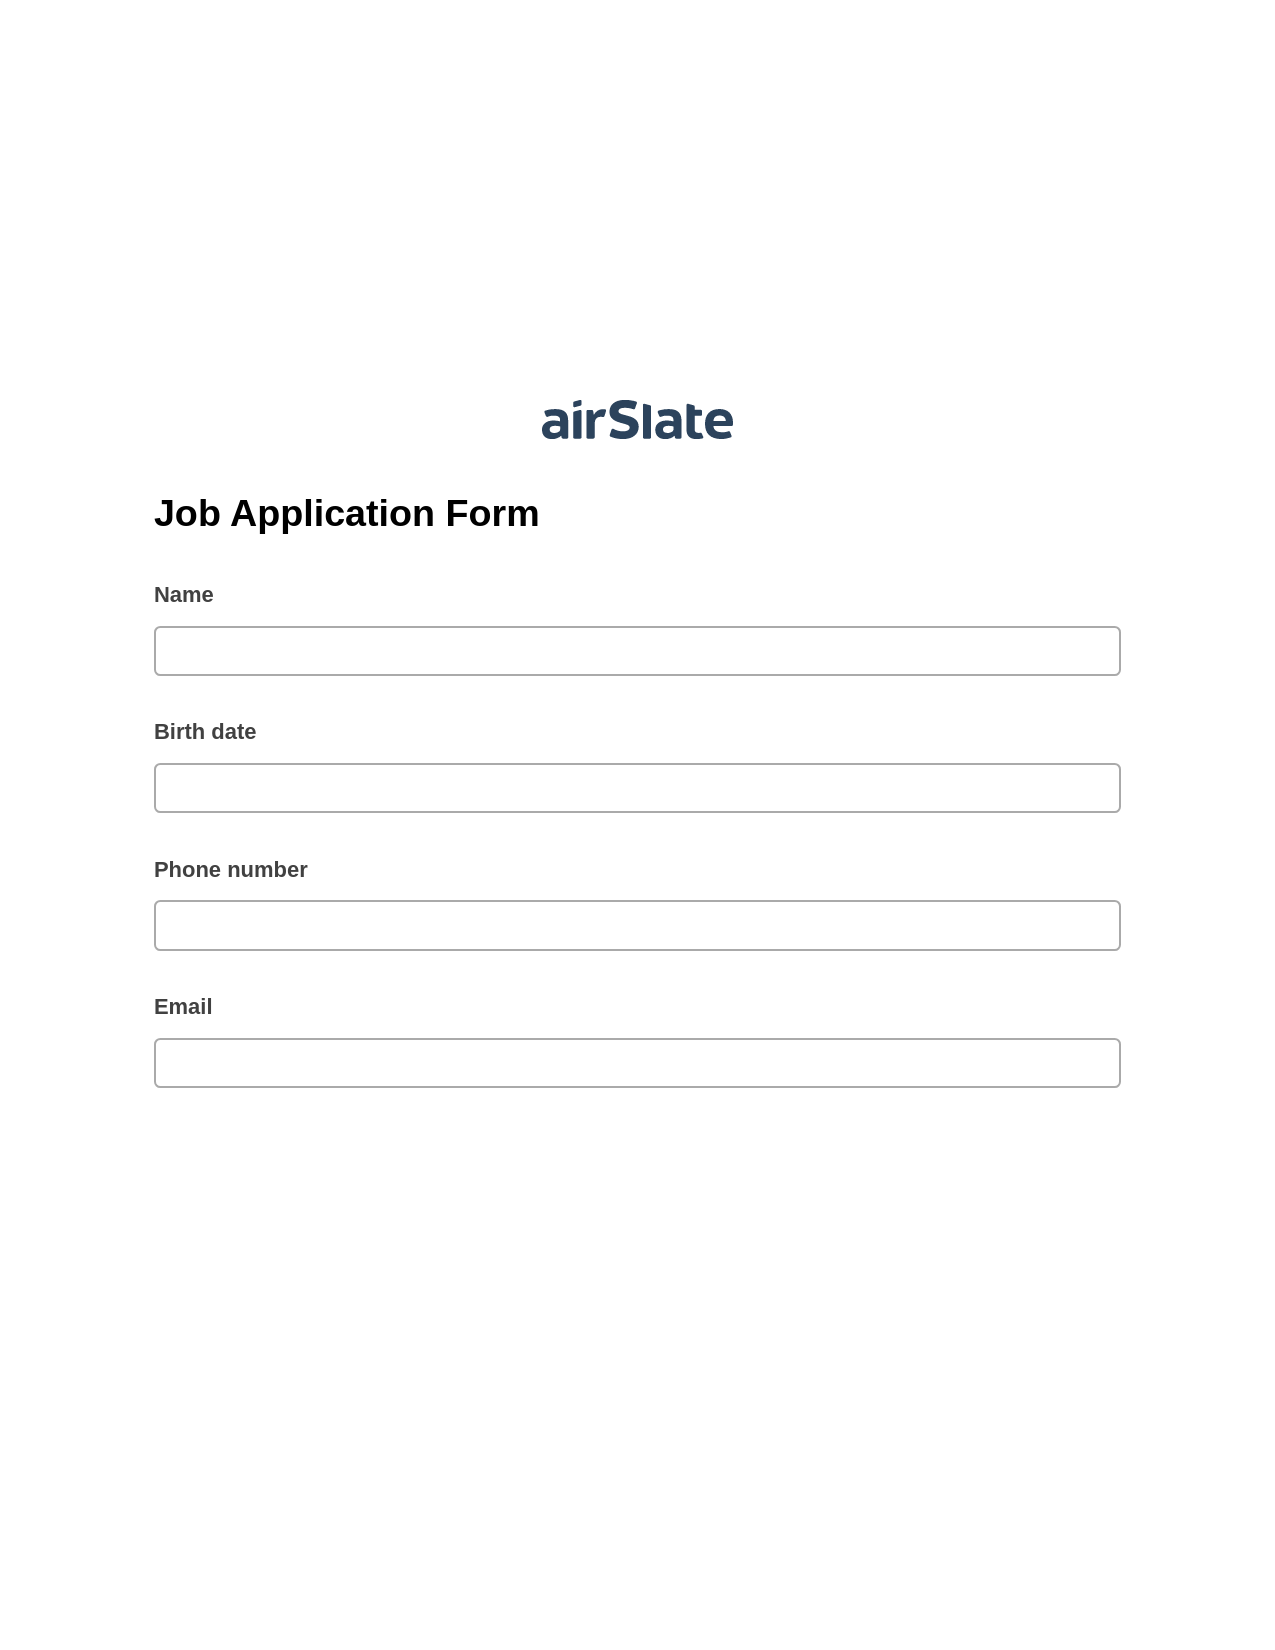 Multirole Job Application Form Pre-fill Dropdown from Airtable, Create NetSuite Records Bot, OneDrive Bot